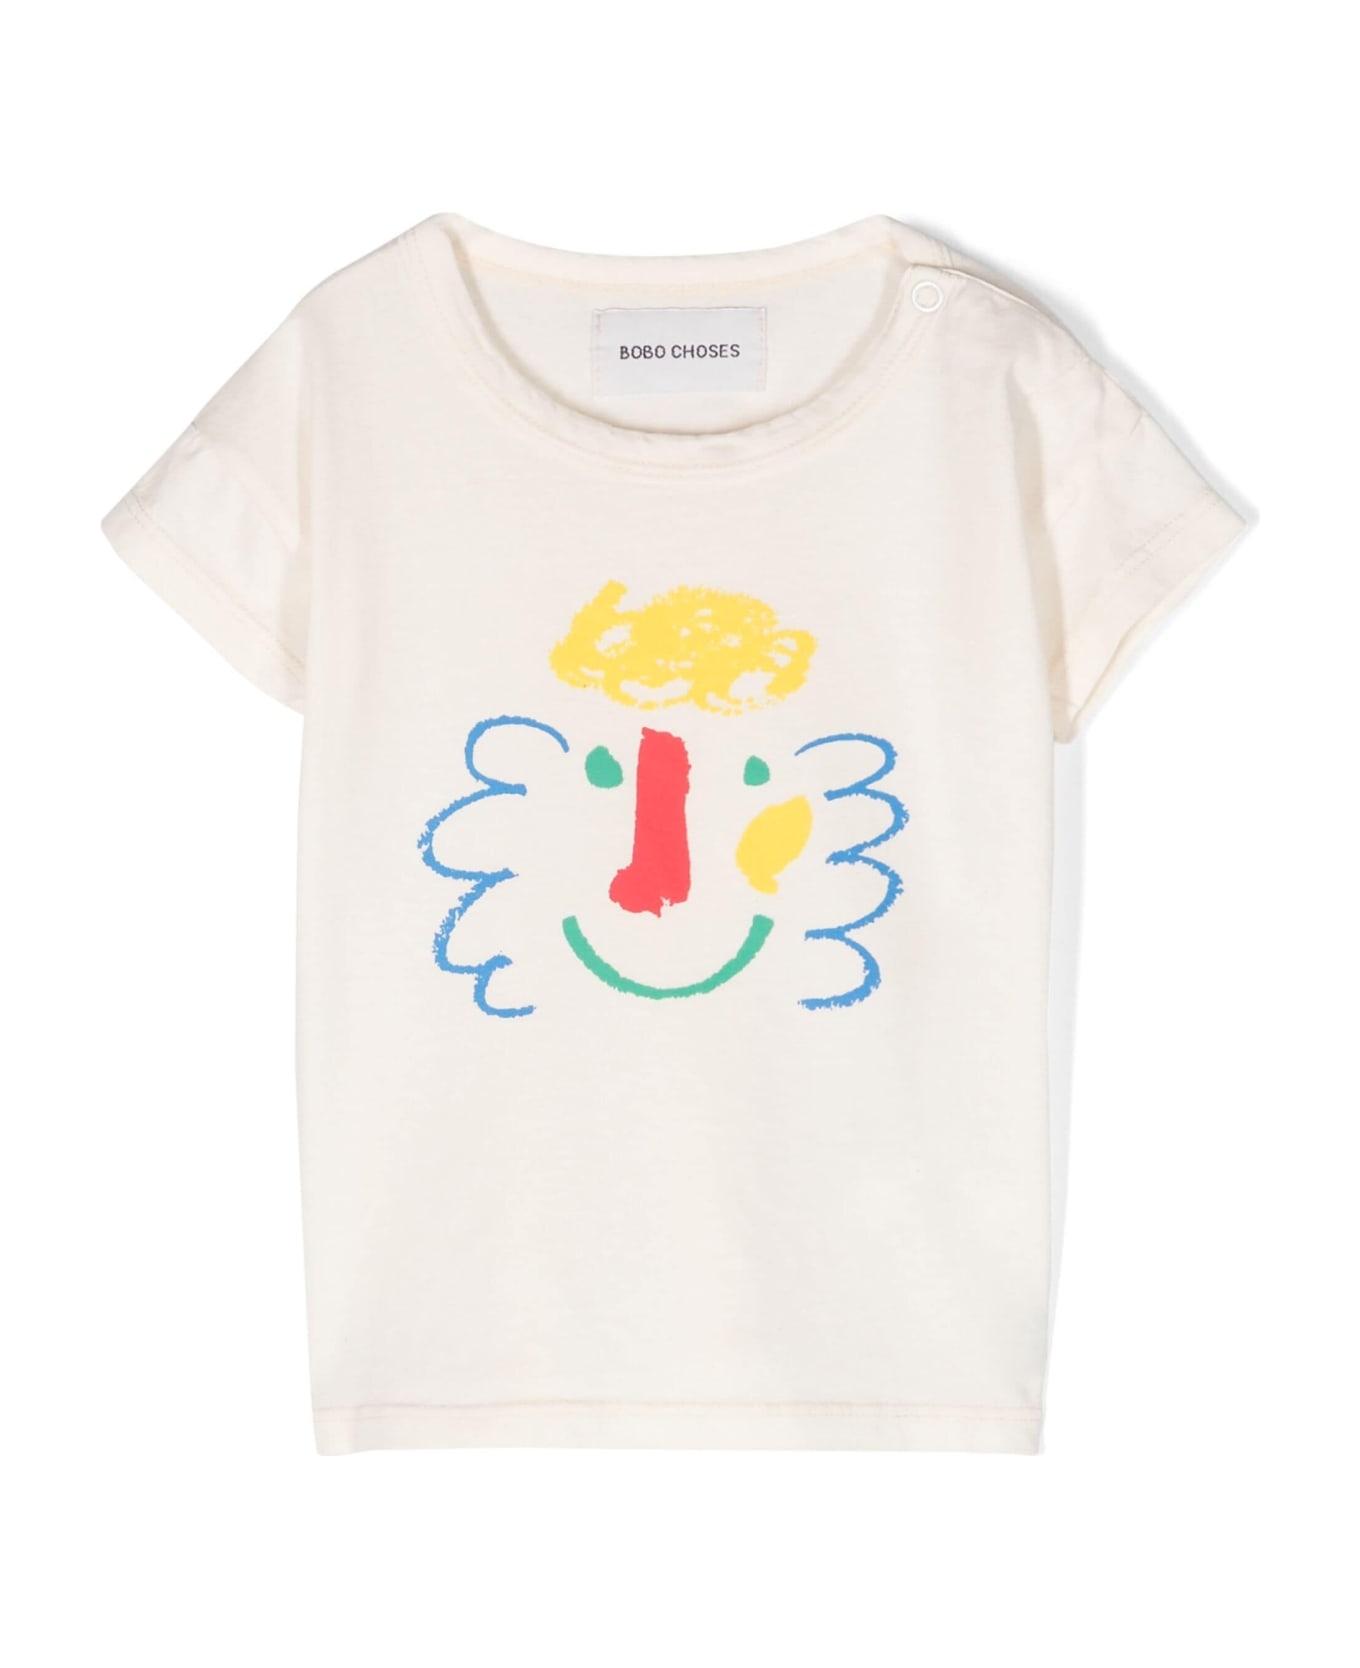 Bobo Choses Ivory T-shirt For Baby Boy With Multicolor Print - Ivory